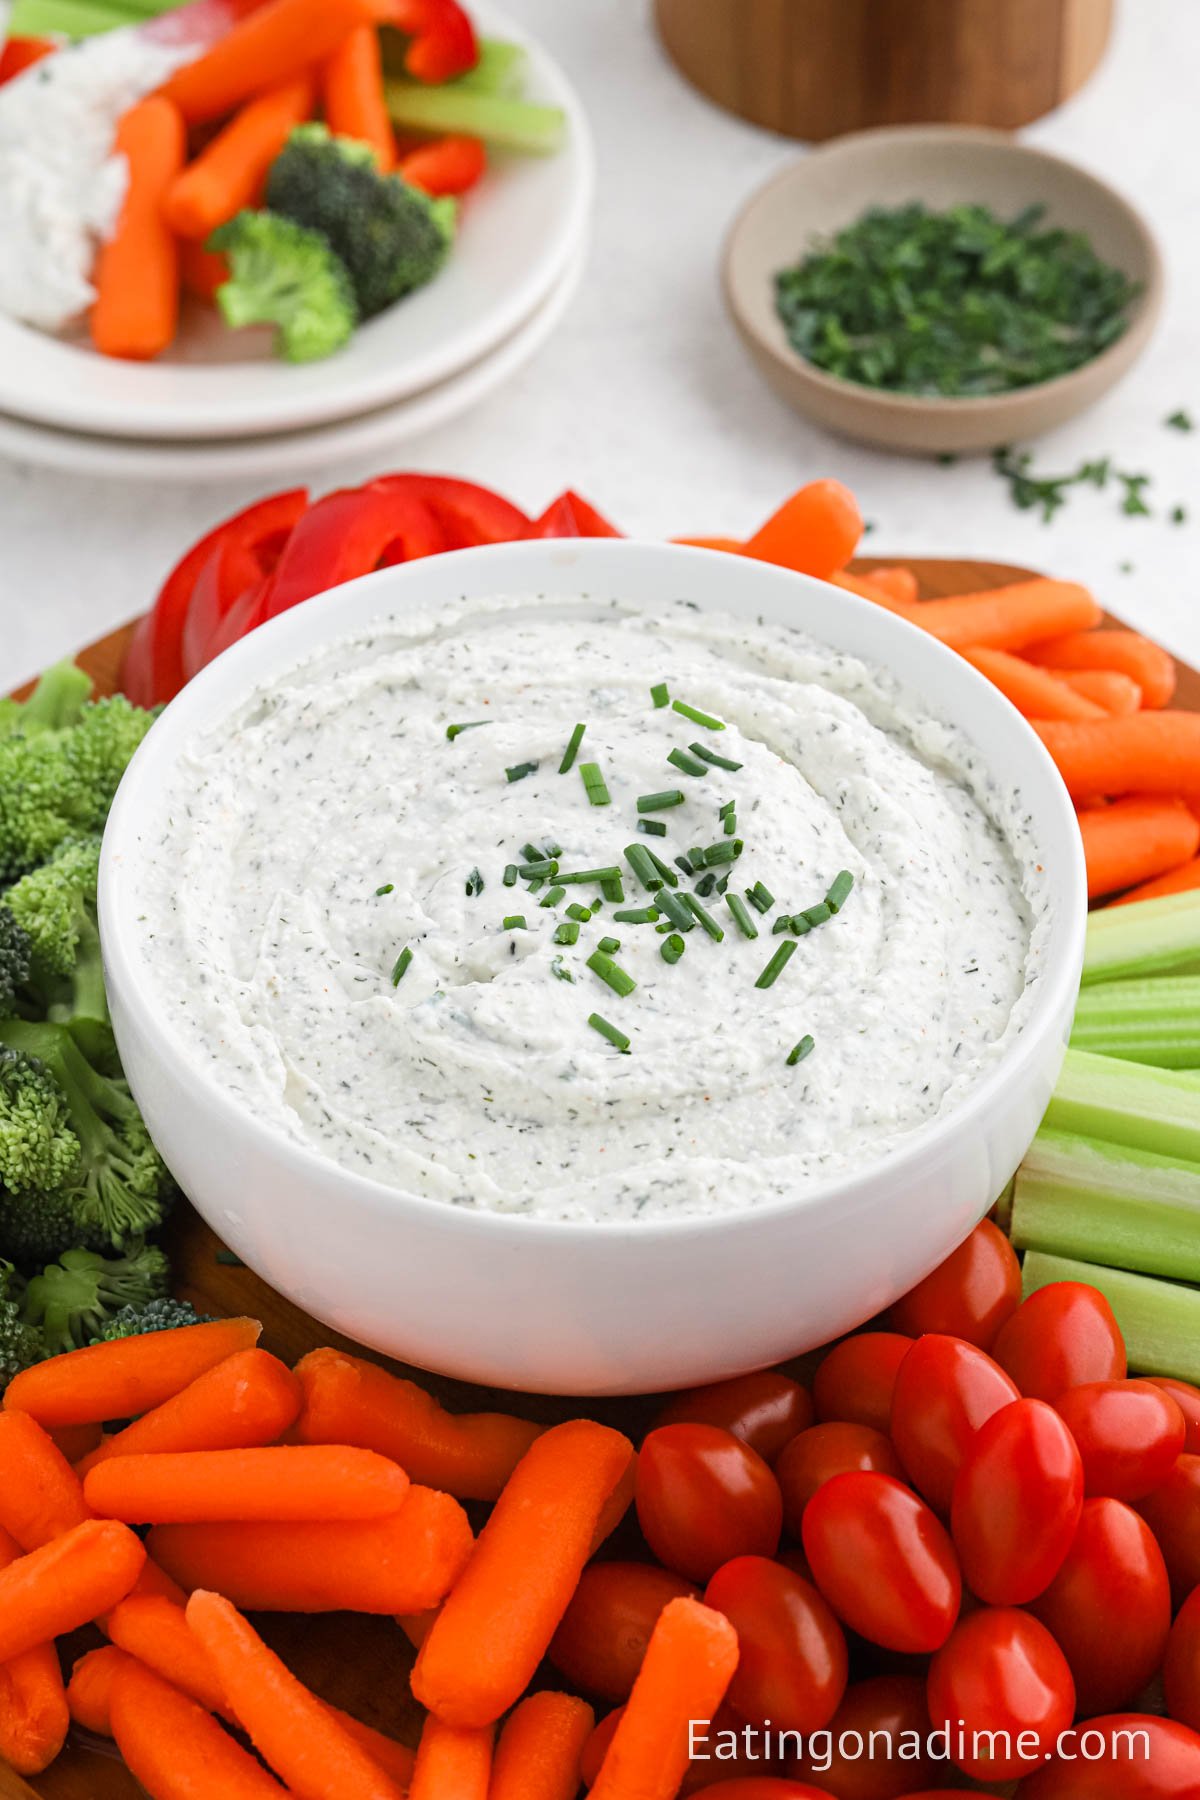 Vegetable platter with veggies and cottage cheese dip